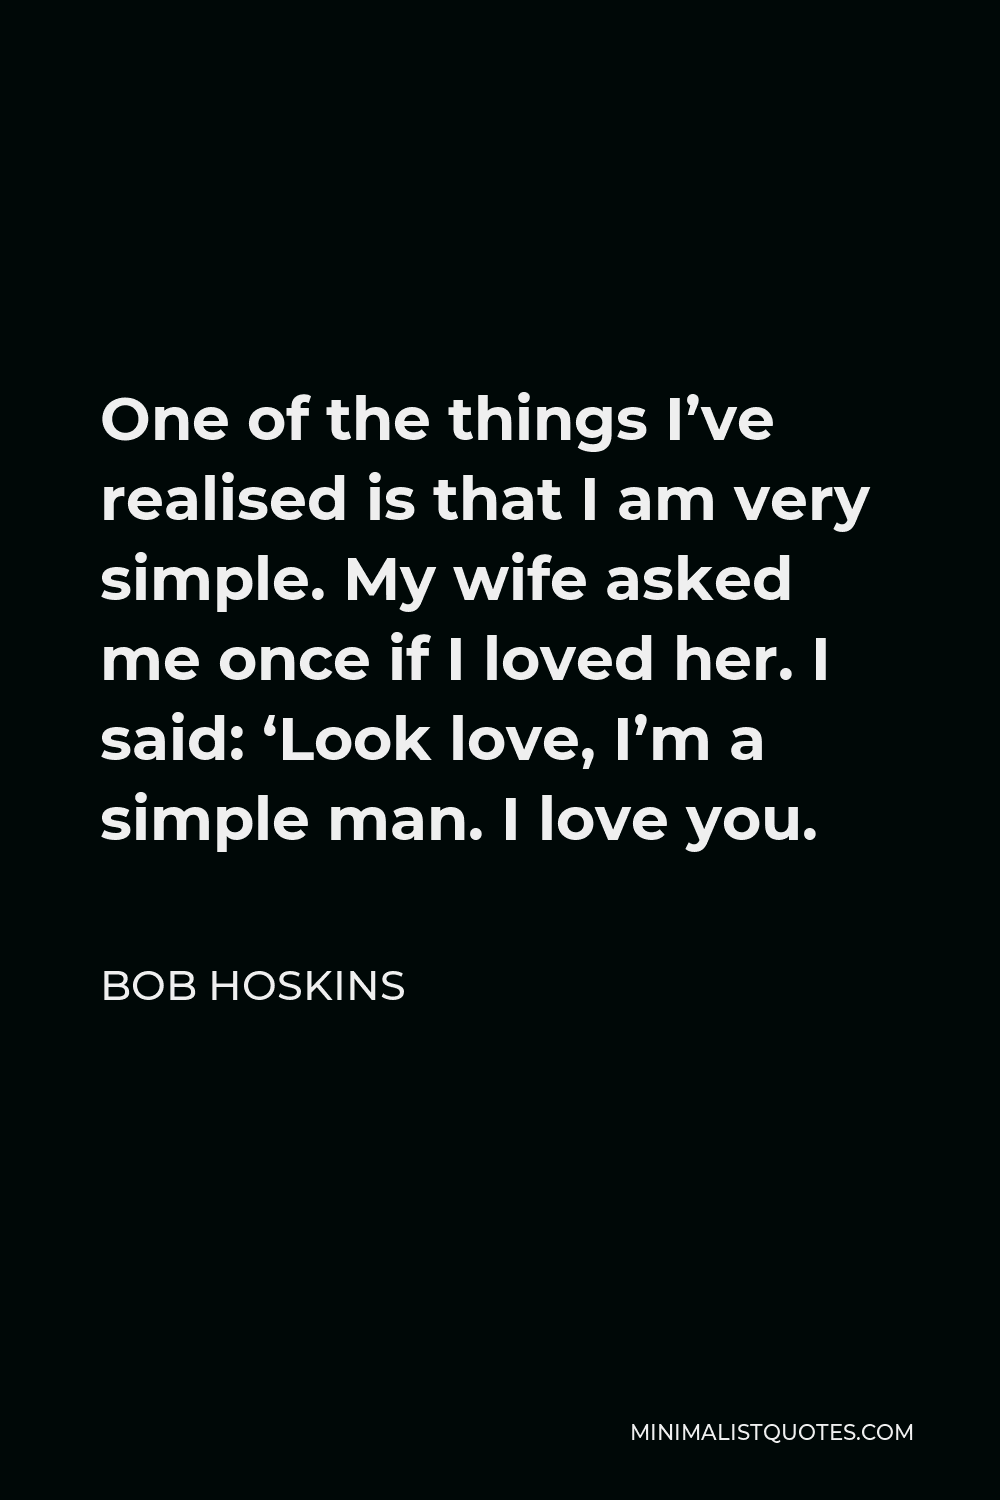 Bob Hoskins Quote - One of the things I’ve realised is that I am very simple. My wife asked me once if I loved her. I said: ‘Look love, I’m a simple man. I love you.